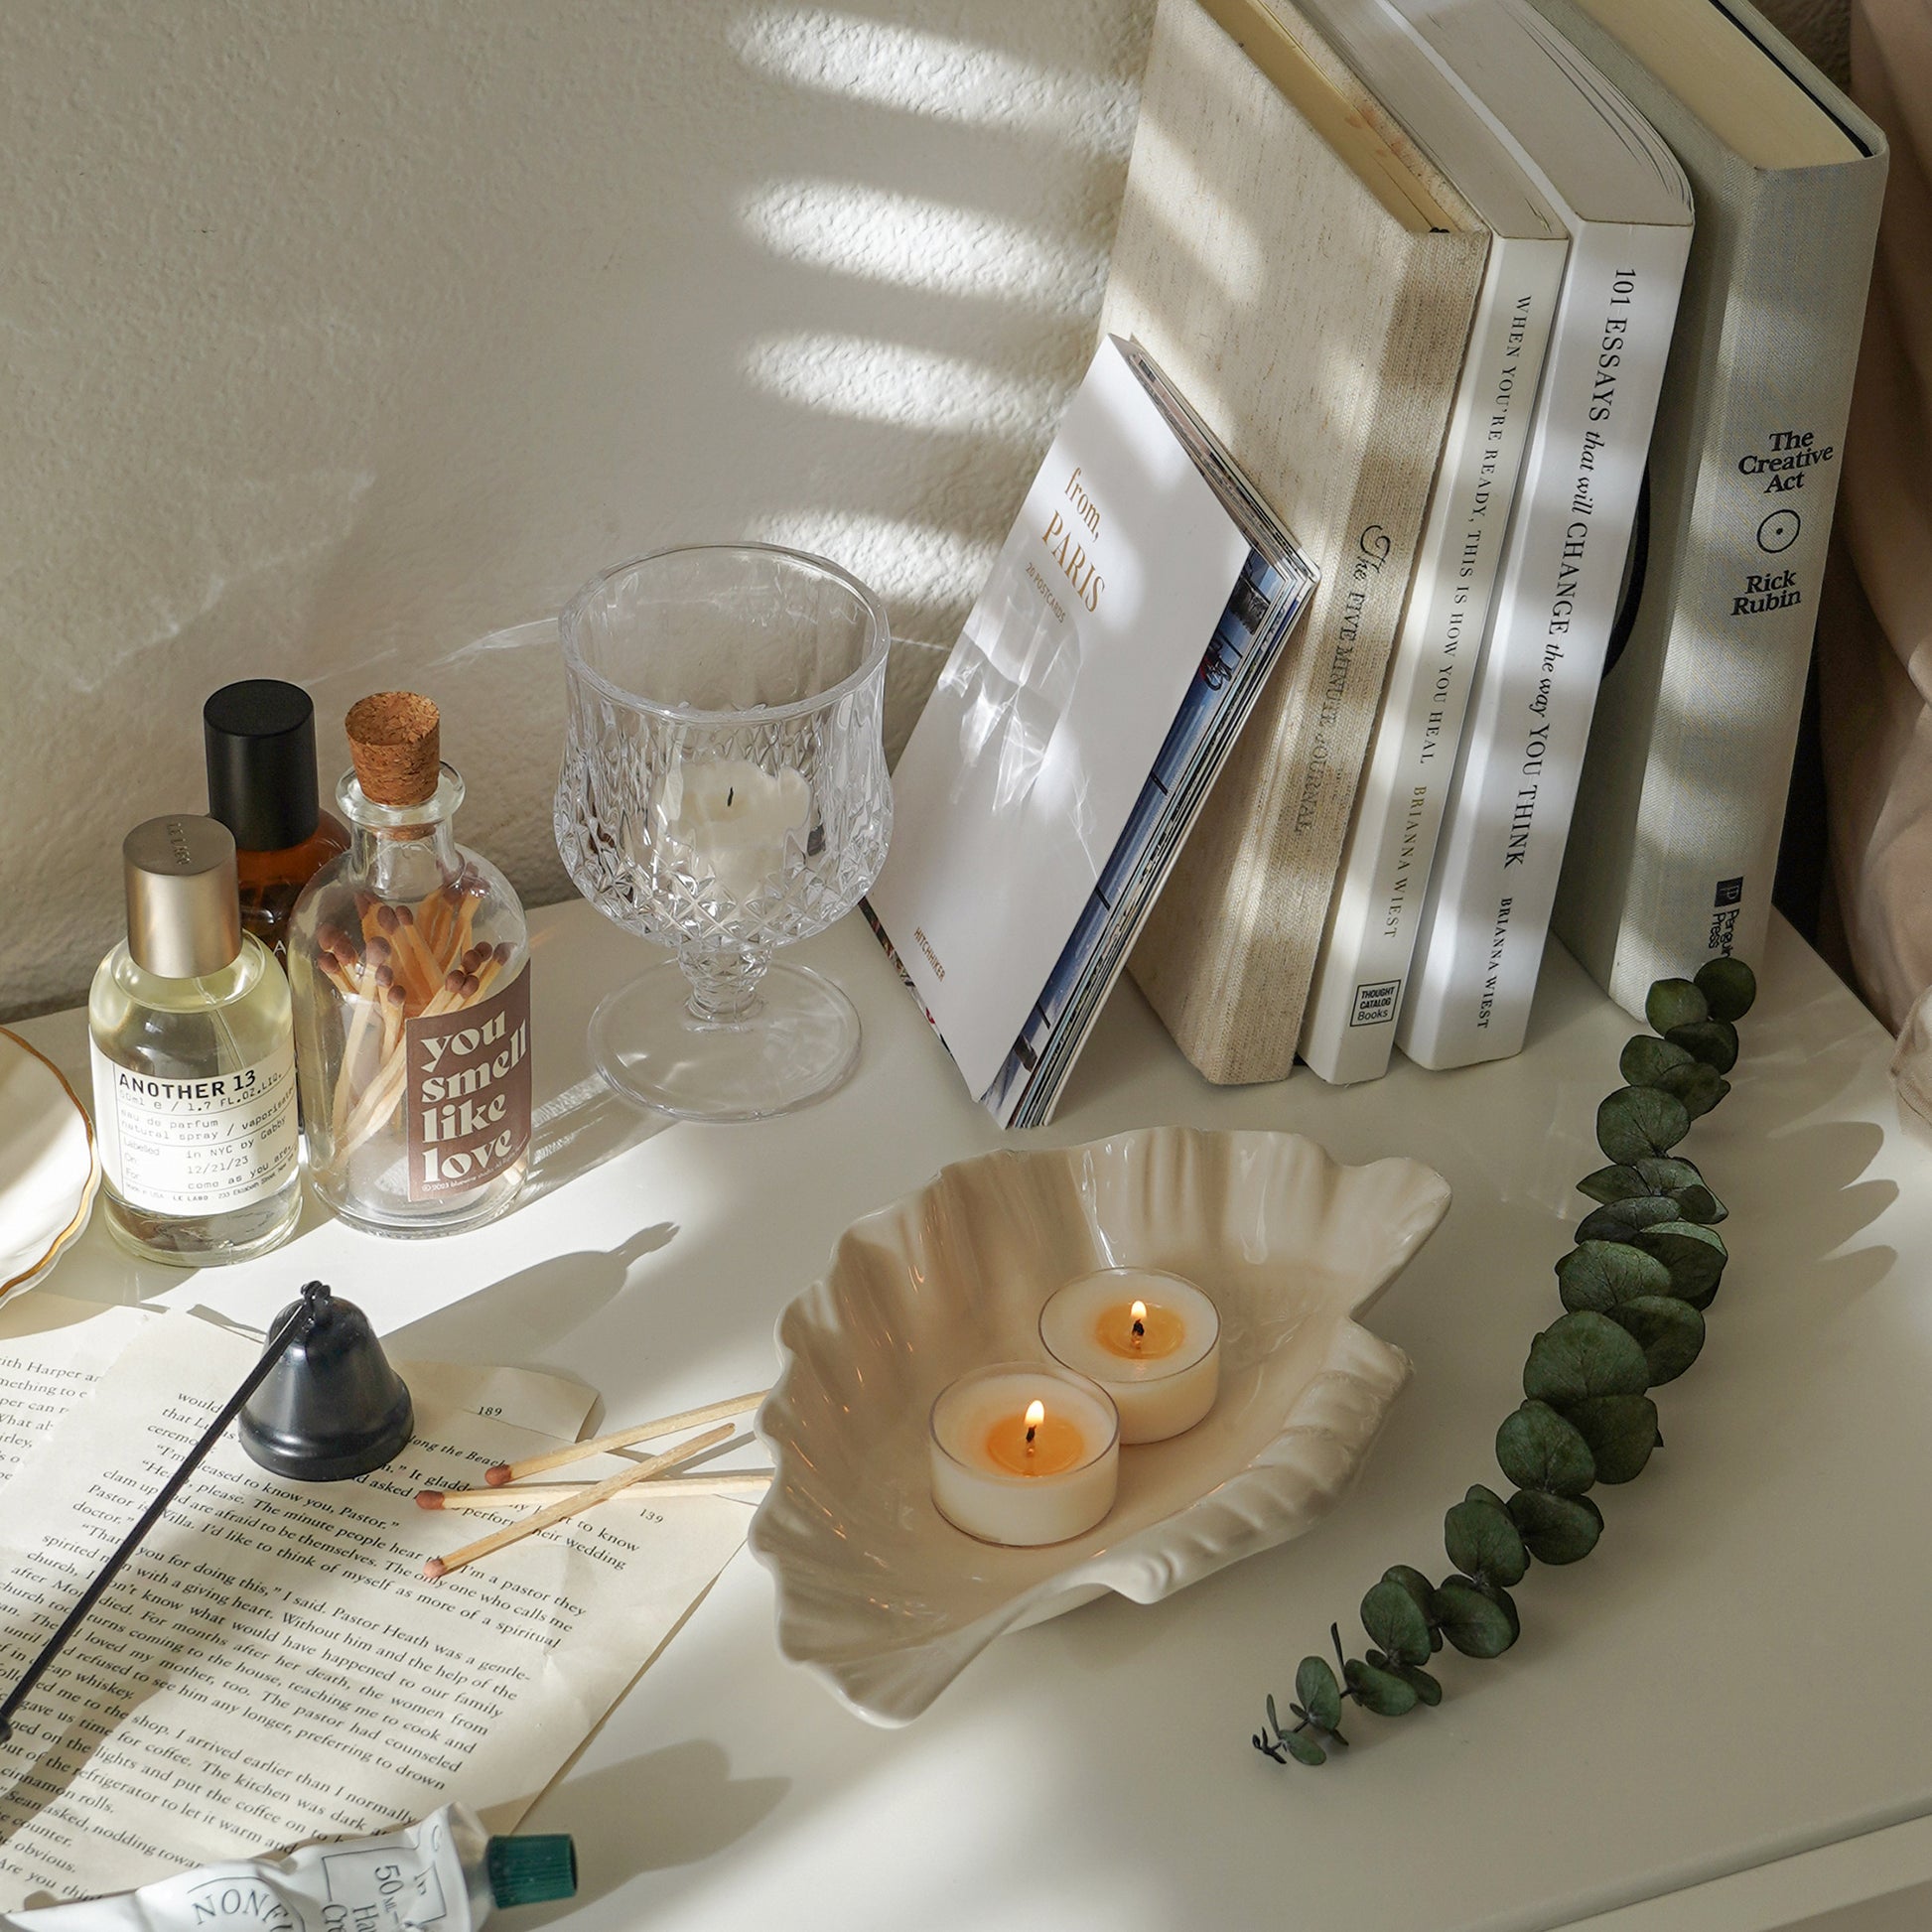 two tealight candles burning in a ceramic shell shape tray, books, postcards, match bottle, perfume, and candle snuffer on white shelves by the bed